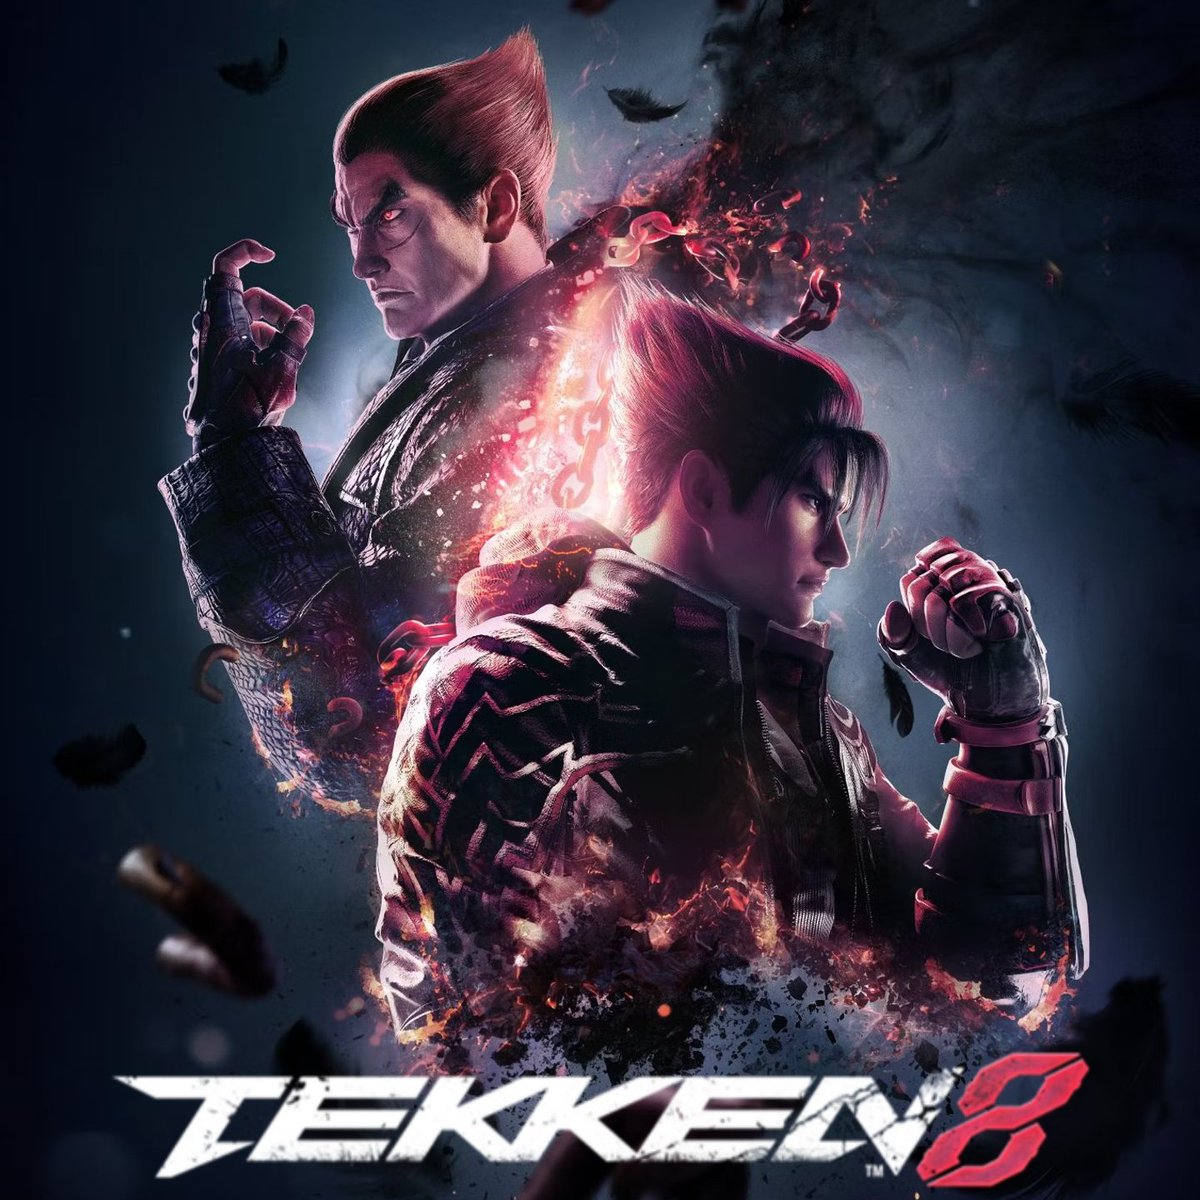 Tekken 8 has sold 2 Million Copies since launch Bandai Namco says sales are better than expected. Tekken 8 is selling faster than Tekken 7. Tekken 7 took around 2 months to sell 2m units while Tekken 8 did it in under 3 weeks